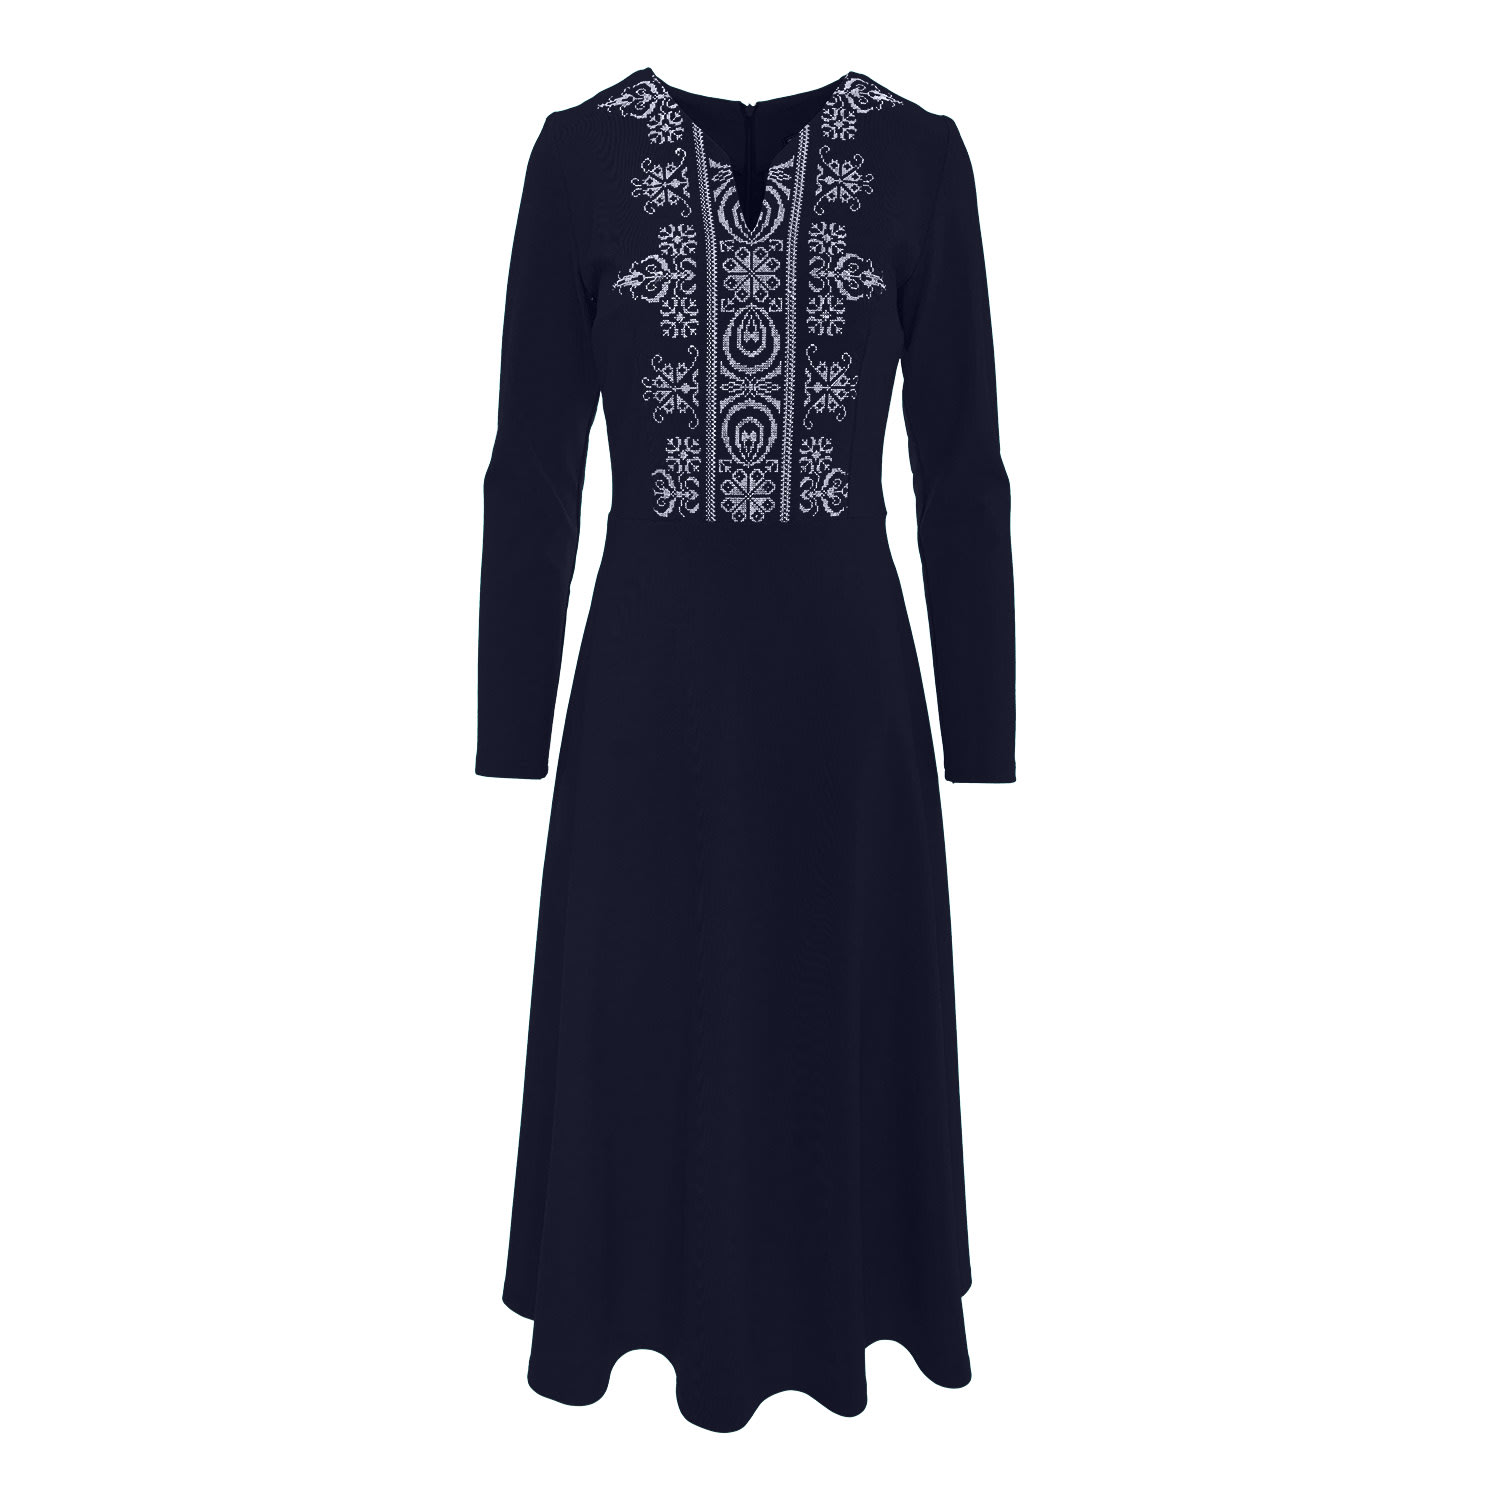 Women’s Midi Dress In Navy Blue Jersey With Floral Embroidery Large Izabela Mandoiu